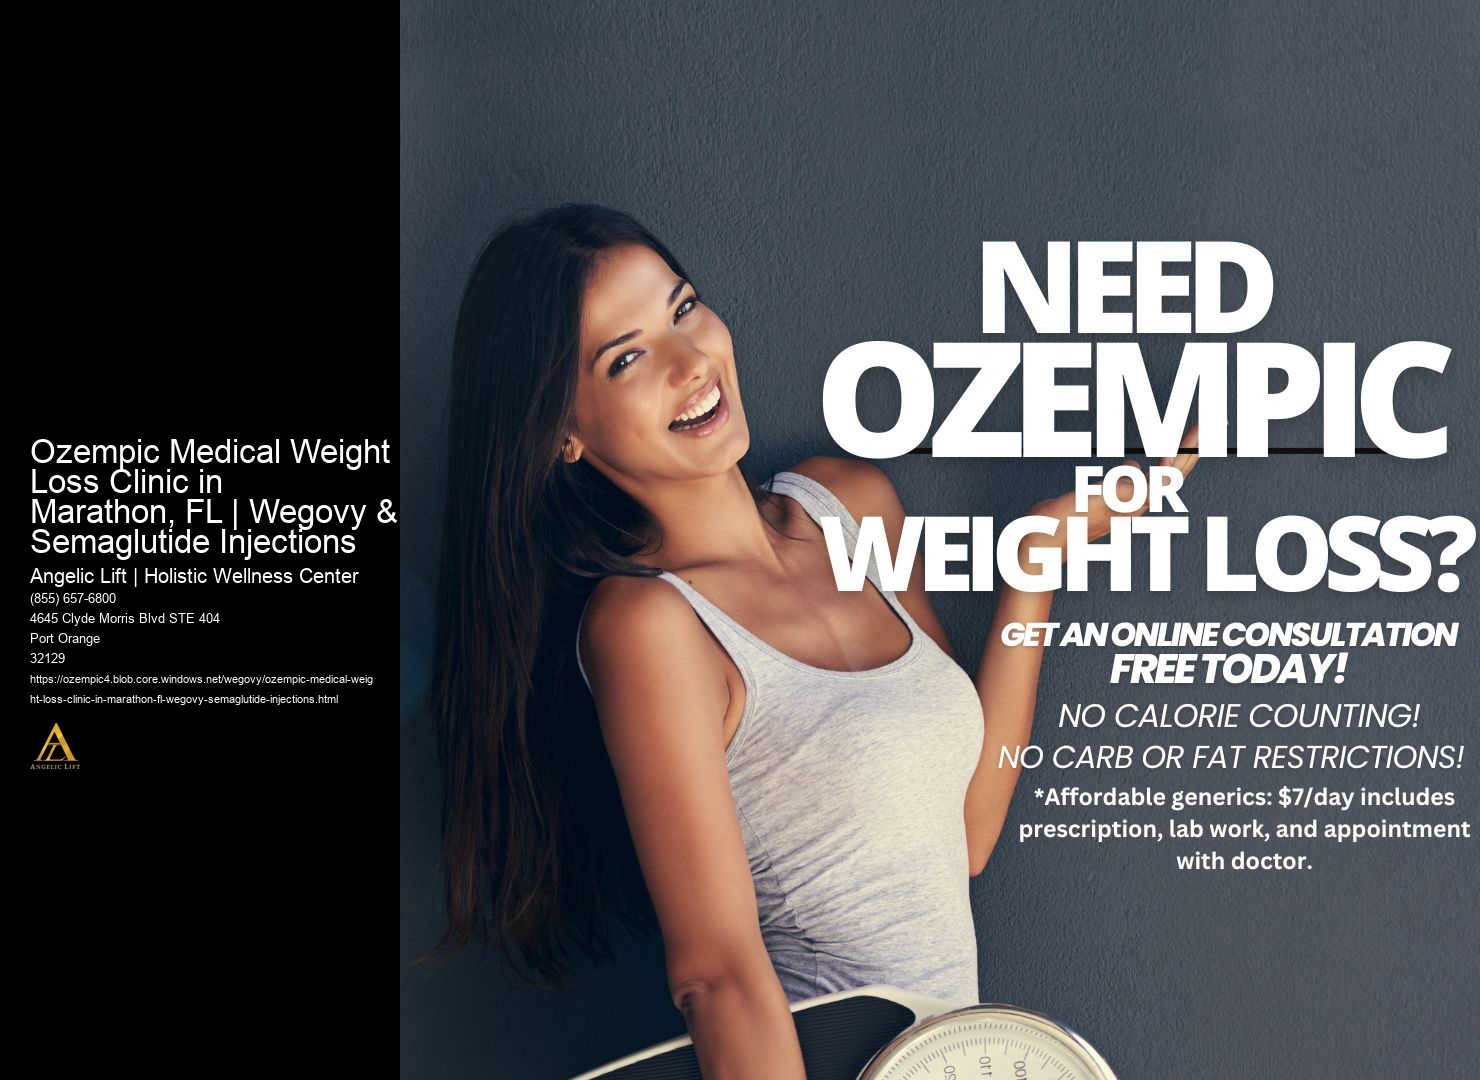 Ozempic Medical Weight Loss Clinic in Marathon, FL | Wegovy & Semaglutide Injections